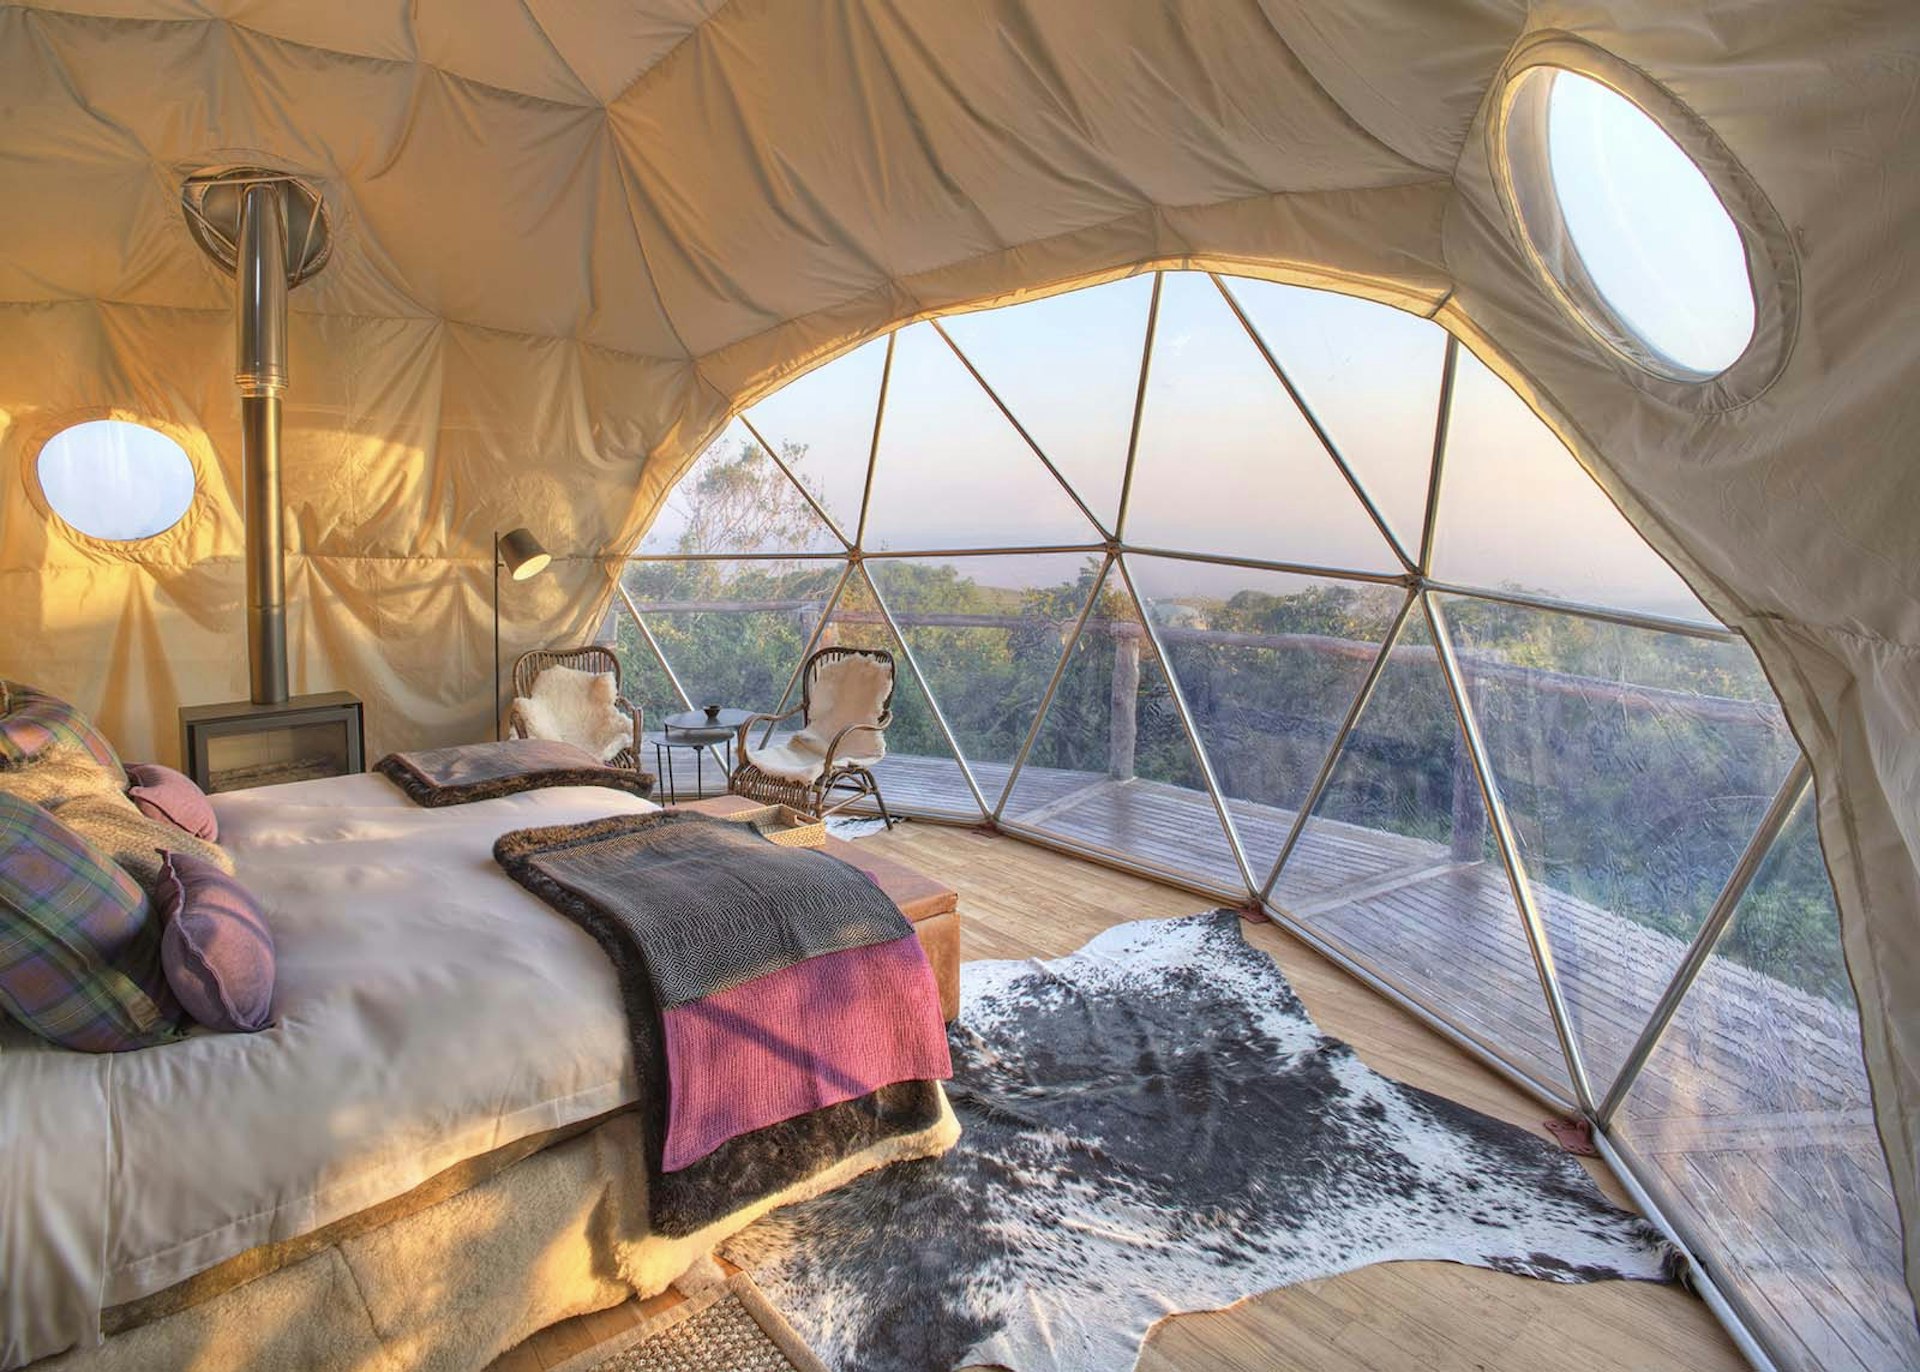 New places to stay - Inside one of the cocoon-like domes of the Highlands Camp overlooking the Ngorongoro crater © The Highlands Camp 